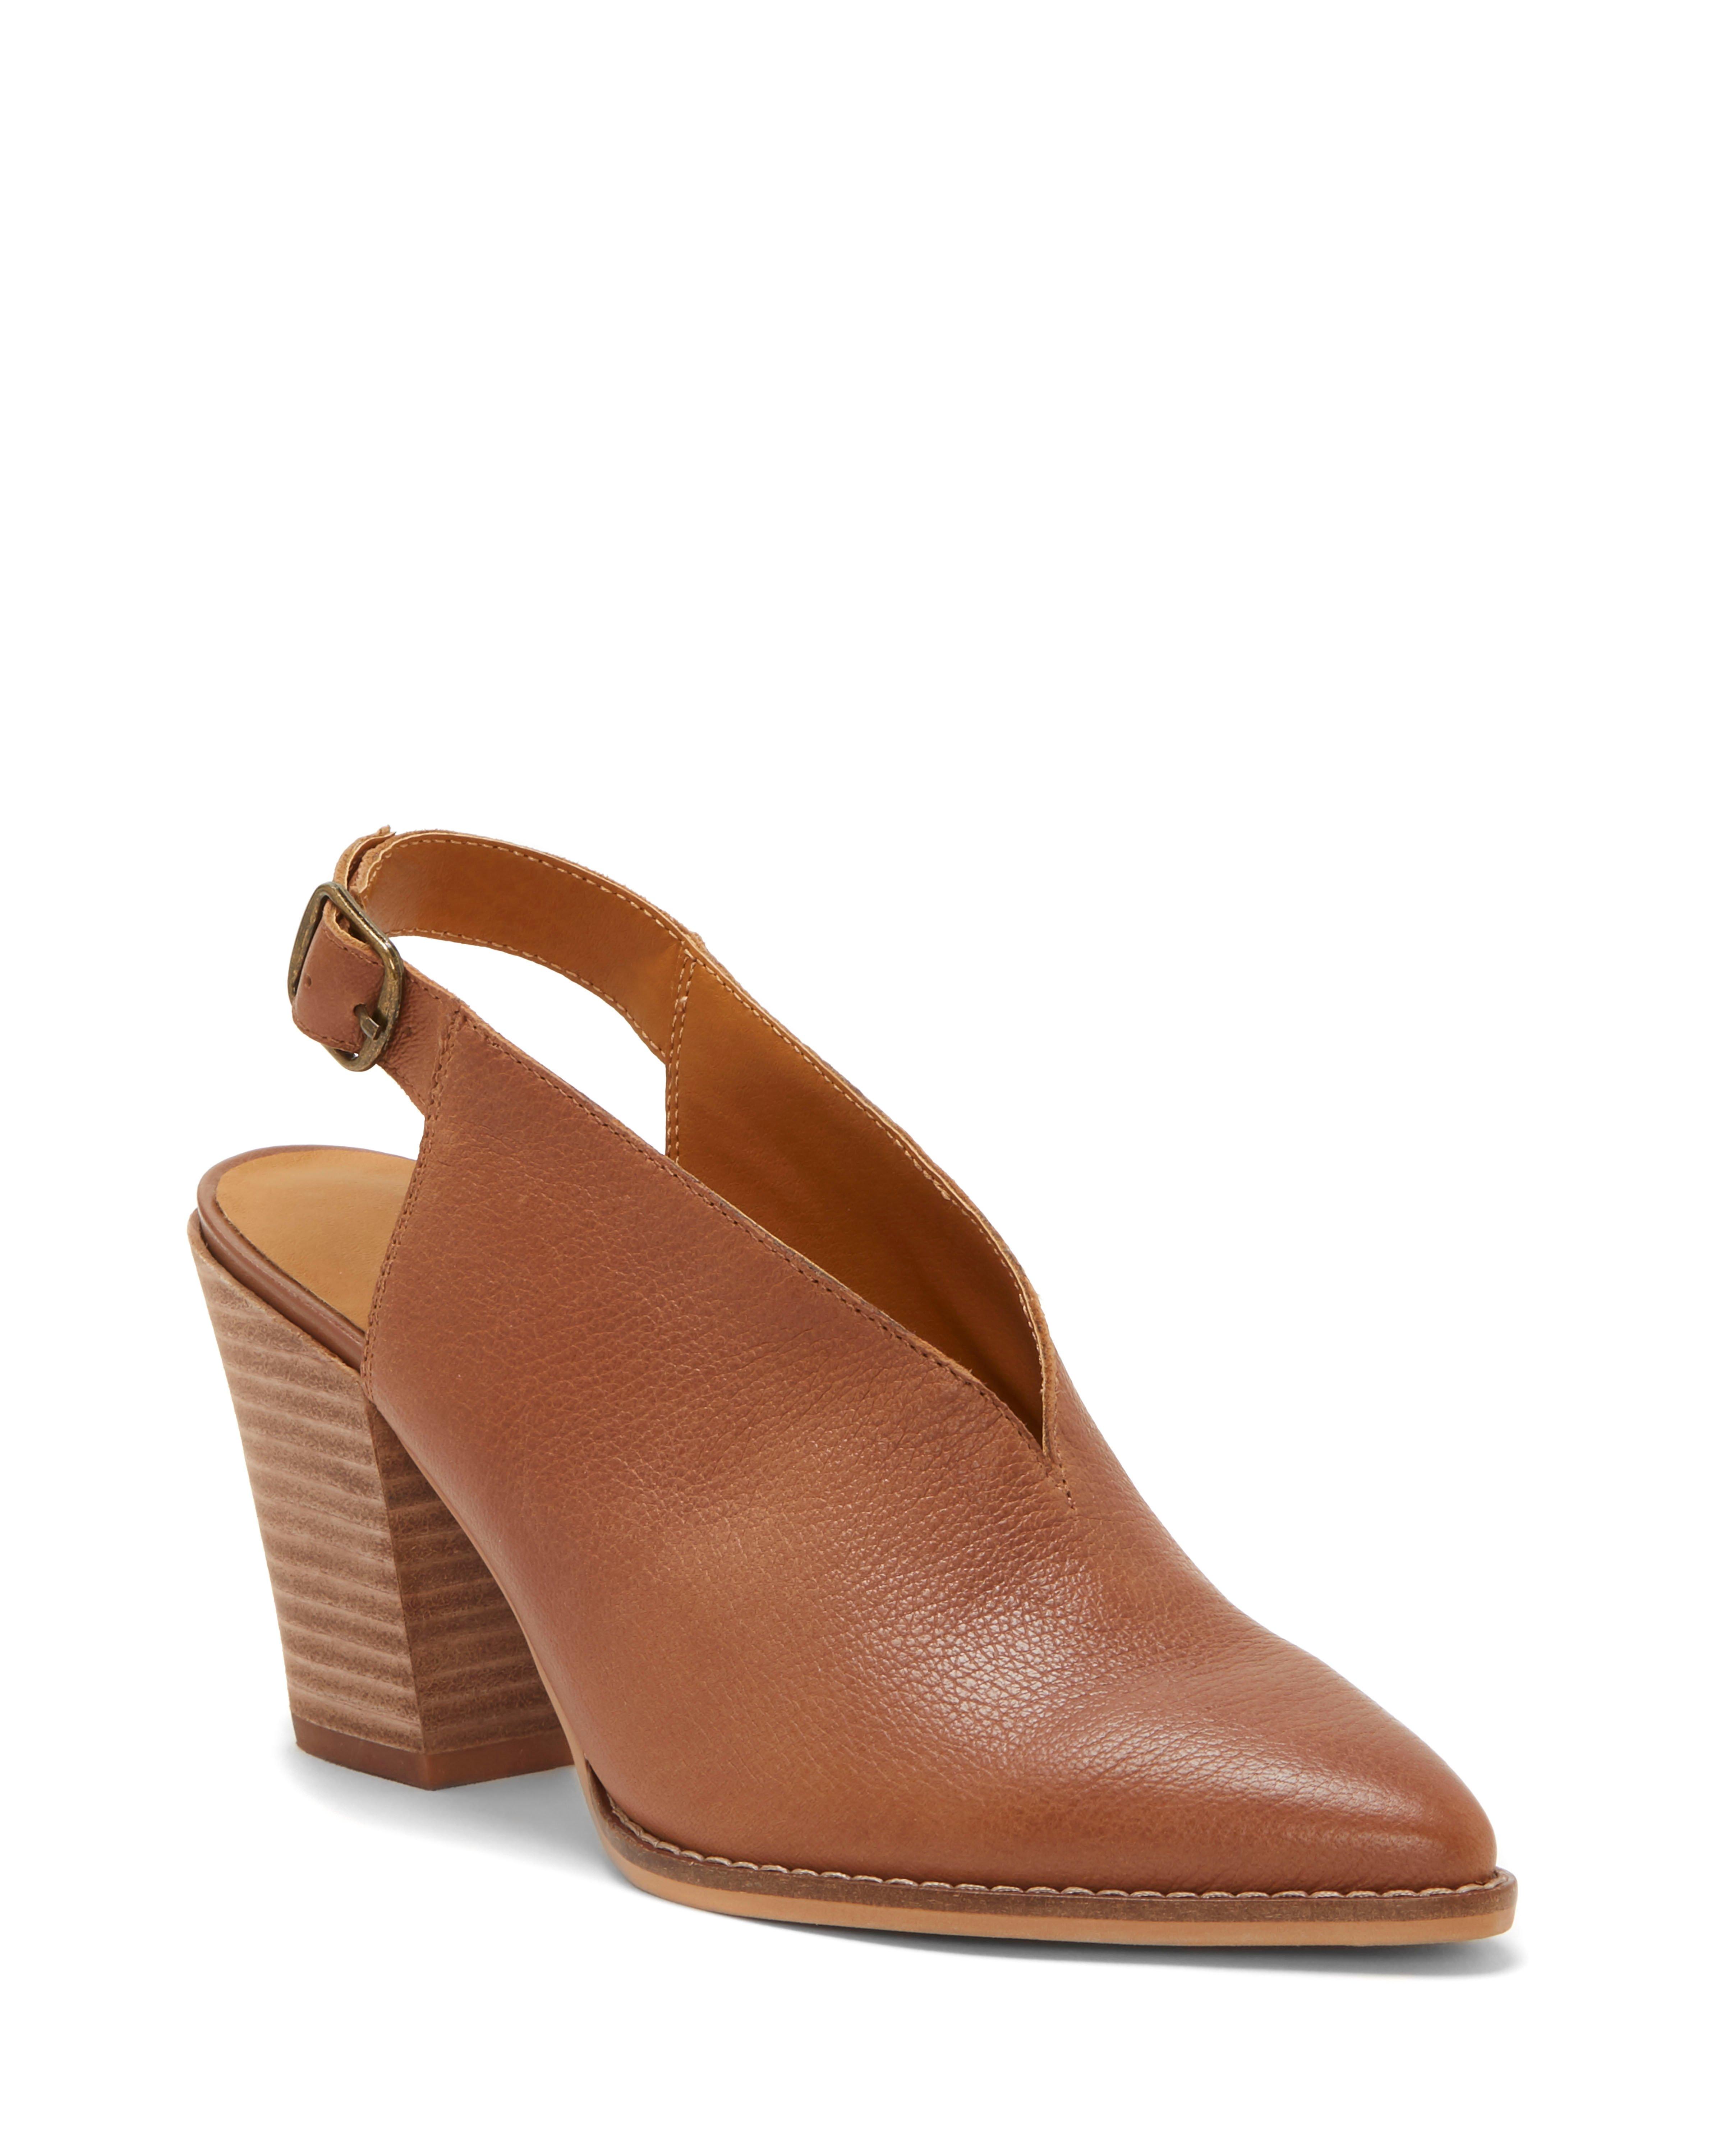 lucky brand tan wedges